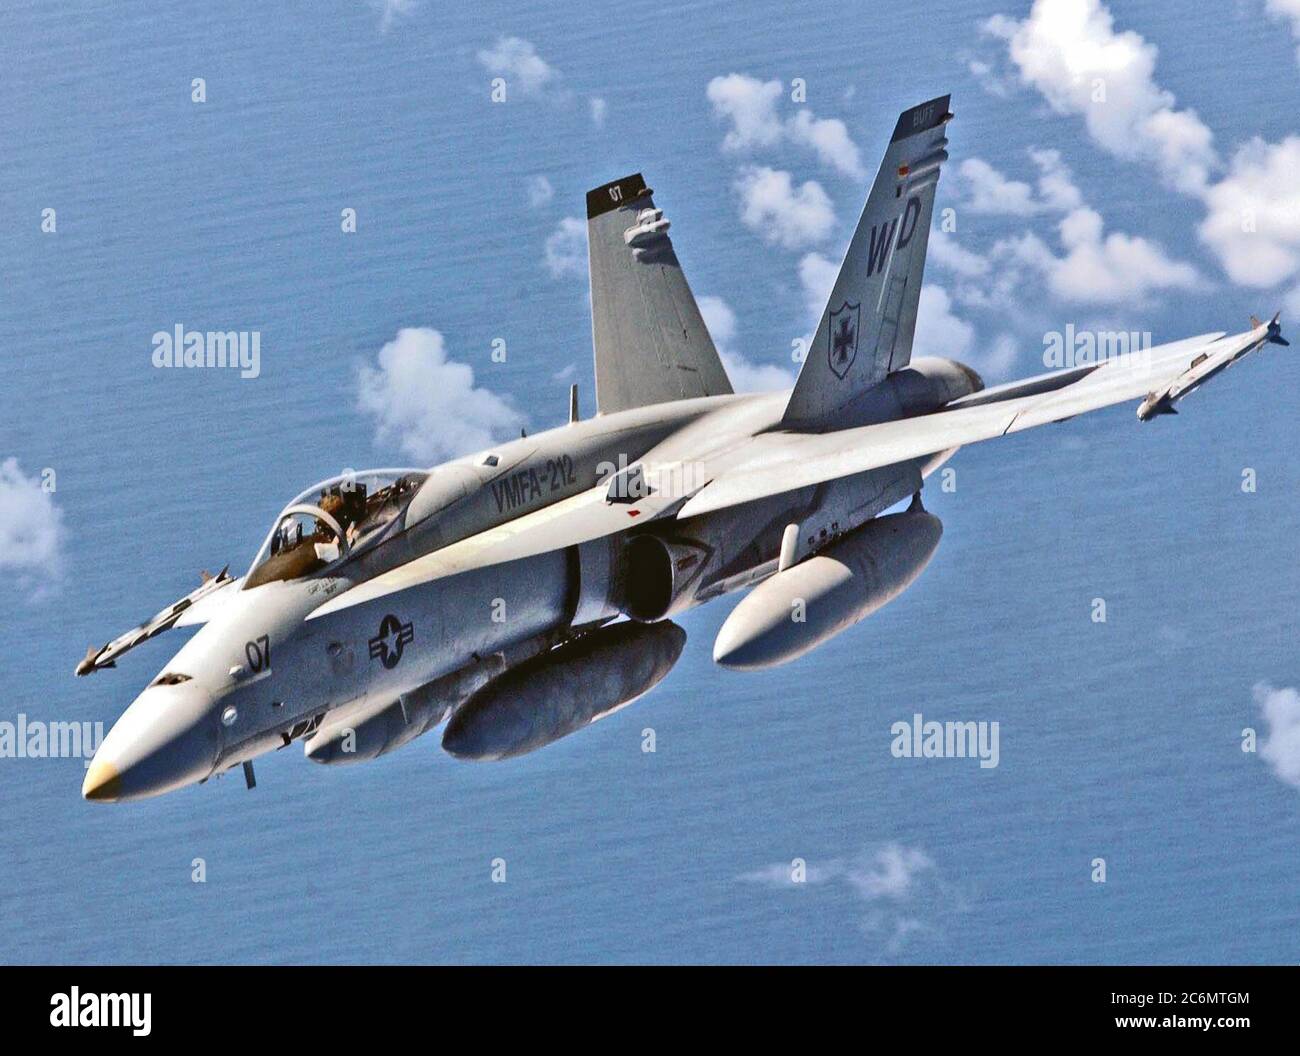 A Marine Aviator for Vertical Marine Fighter Attack Squadron 212 (VMFA-212), pilots his F/A18 Hornet over the South China Sea Stock Photo